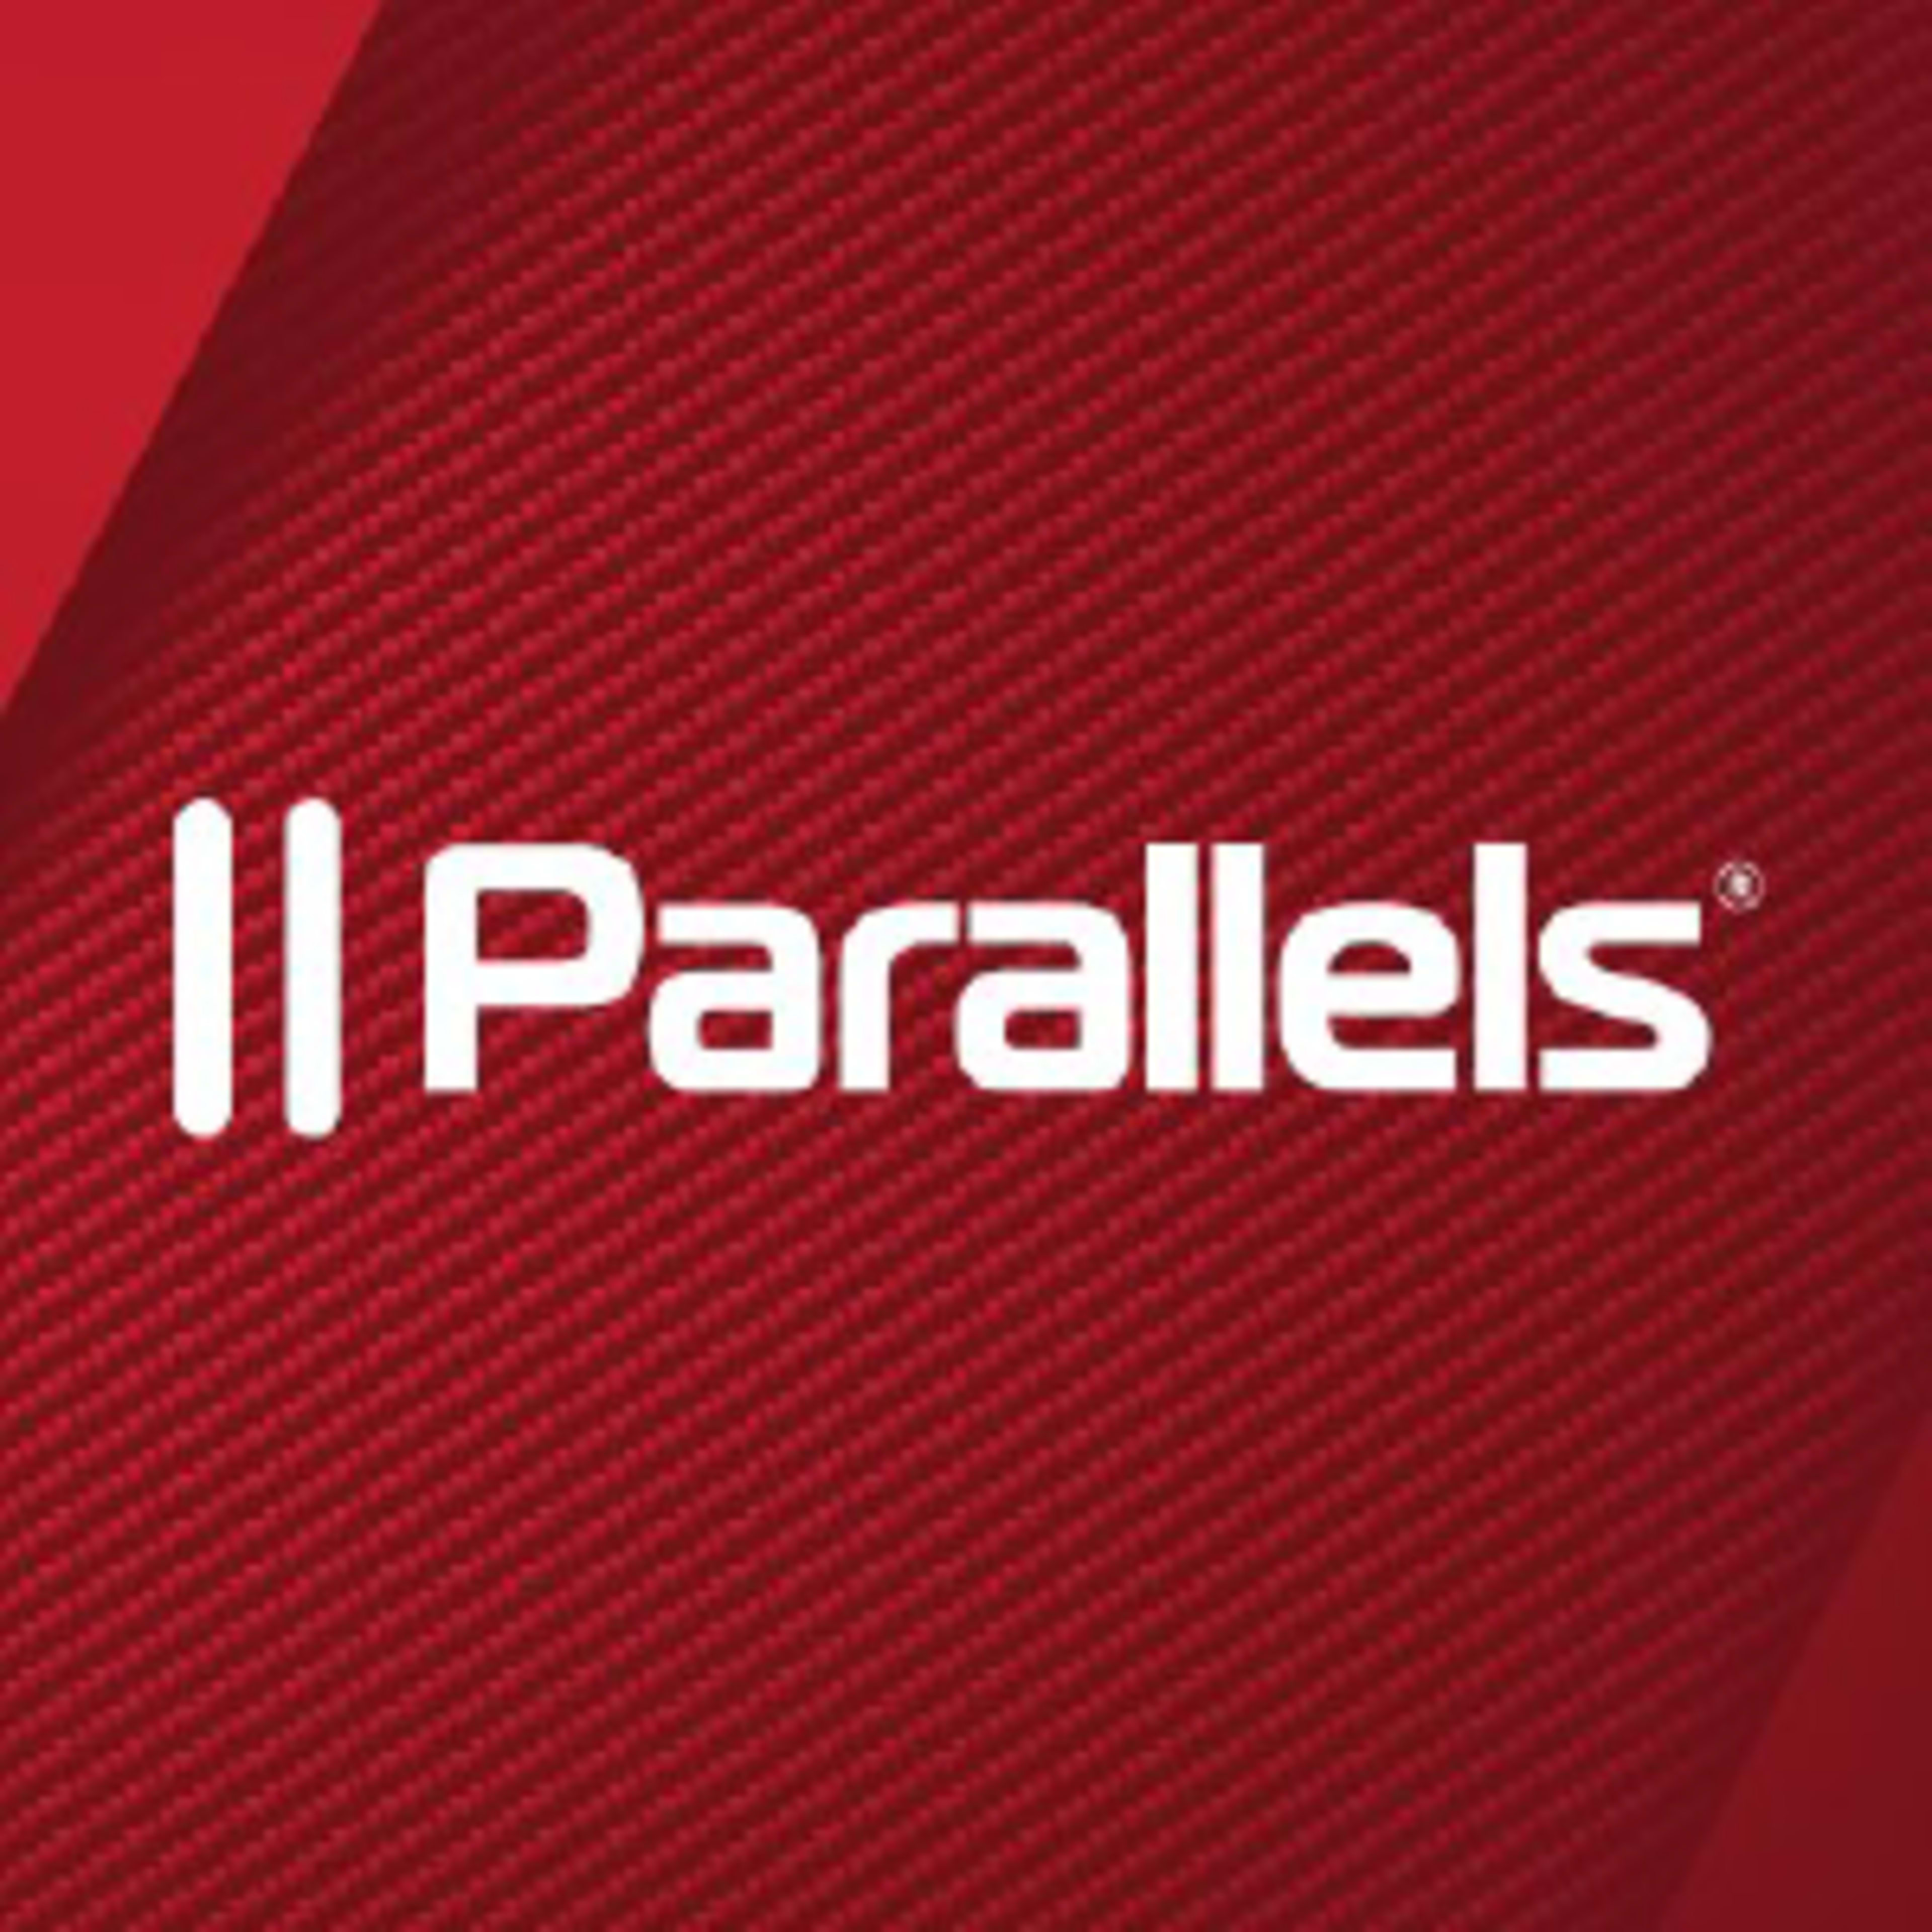 Parallels Code